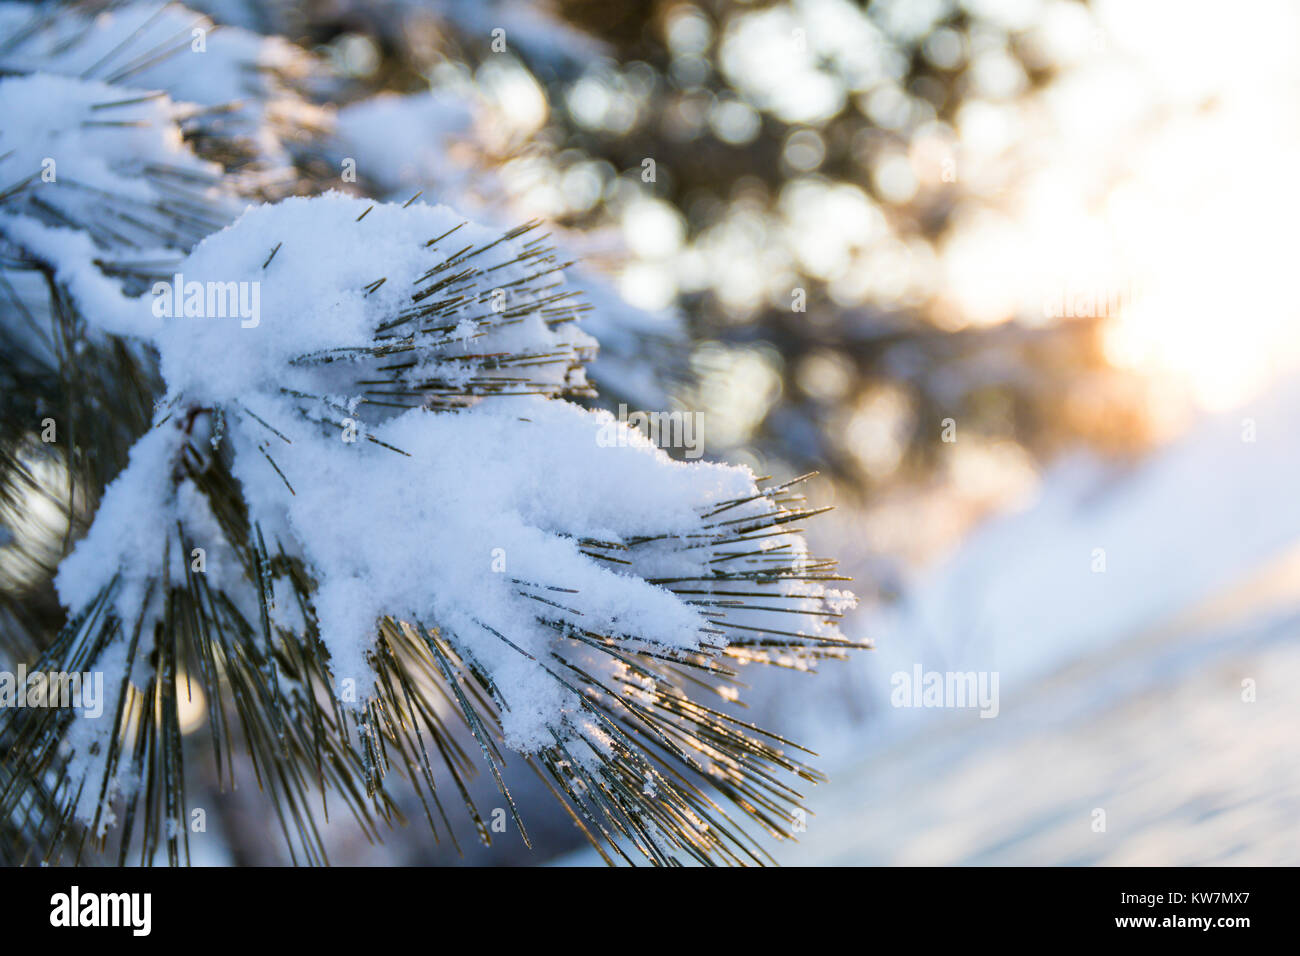 White pine tree branches covered in freshly fallen snow as the sun ...